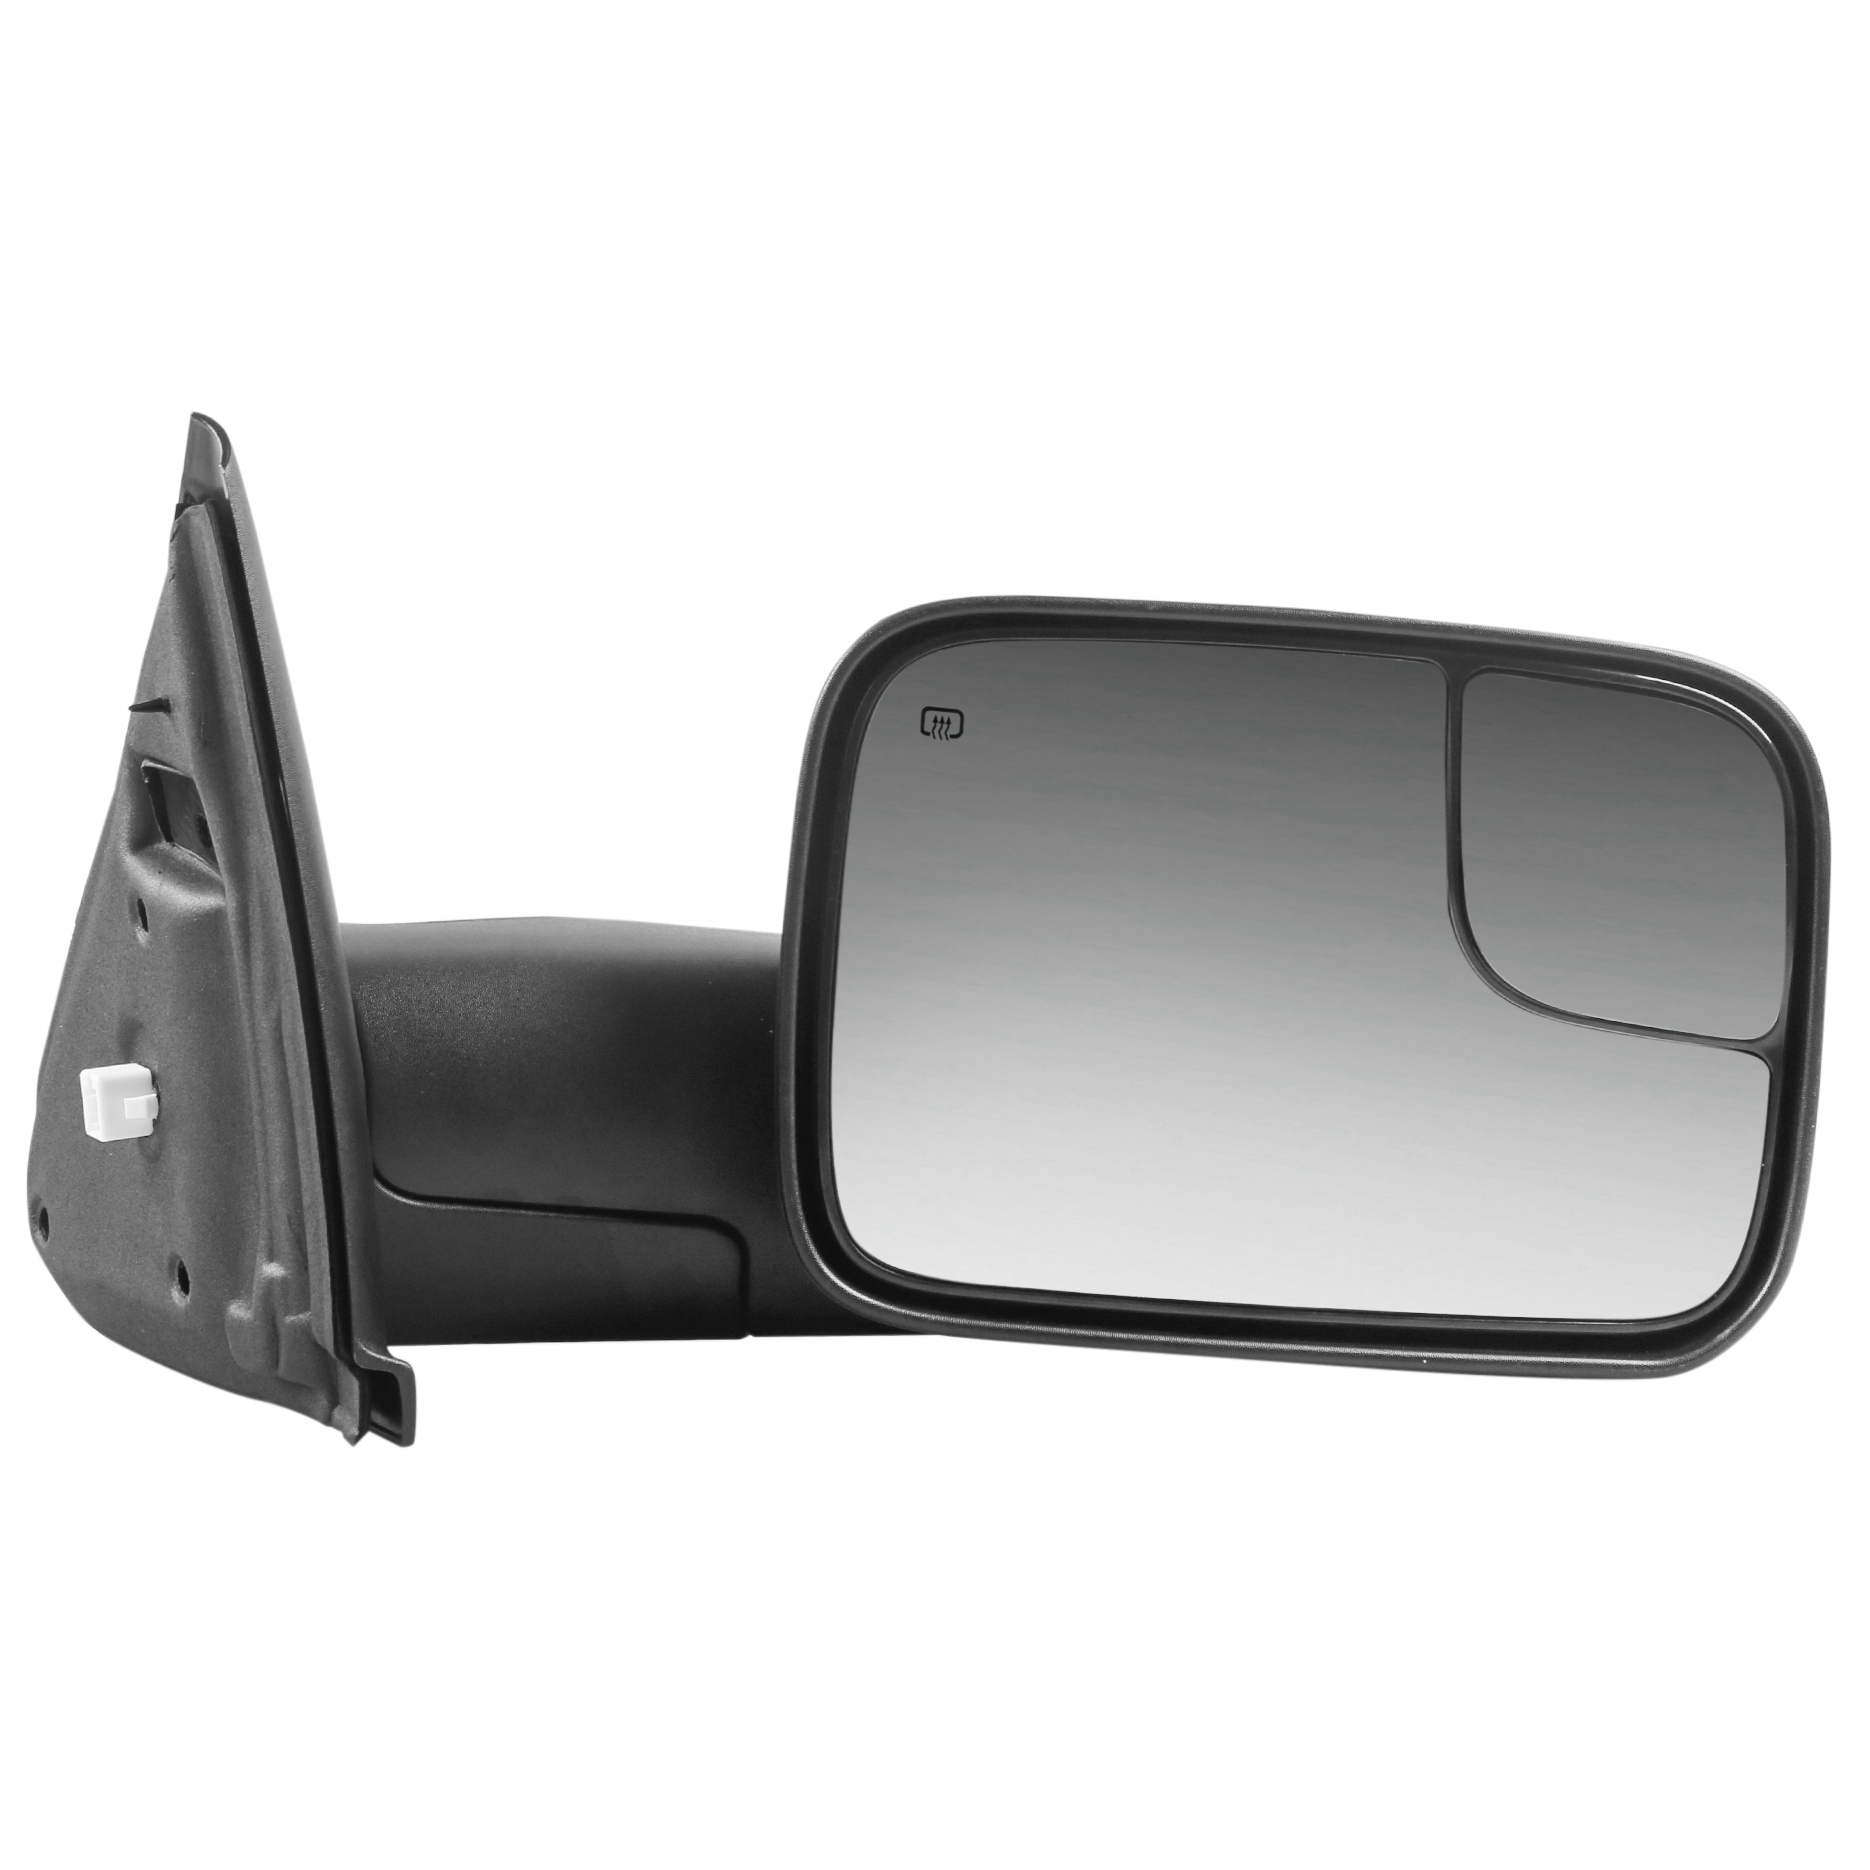 RH Passenger Side Heated Tow Mirror for Dodge 02-08 Ram 1500 03-09 Ram2500 3500 | eBay 2003 Dodge Ram 1500 Passenger Side Mirror